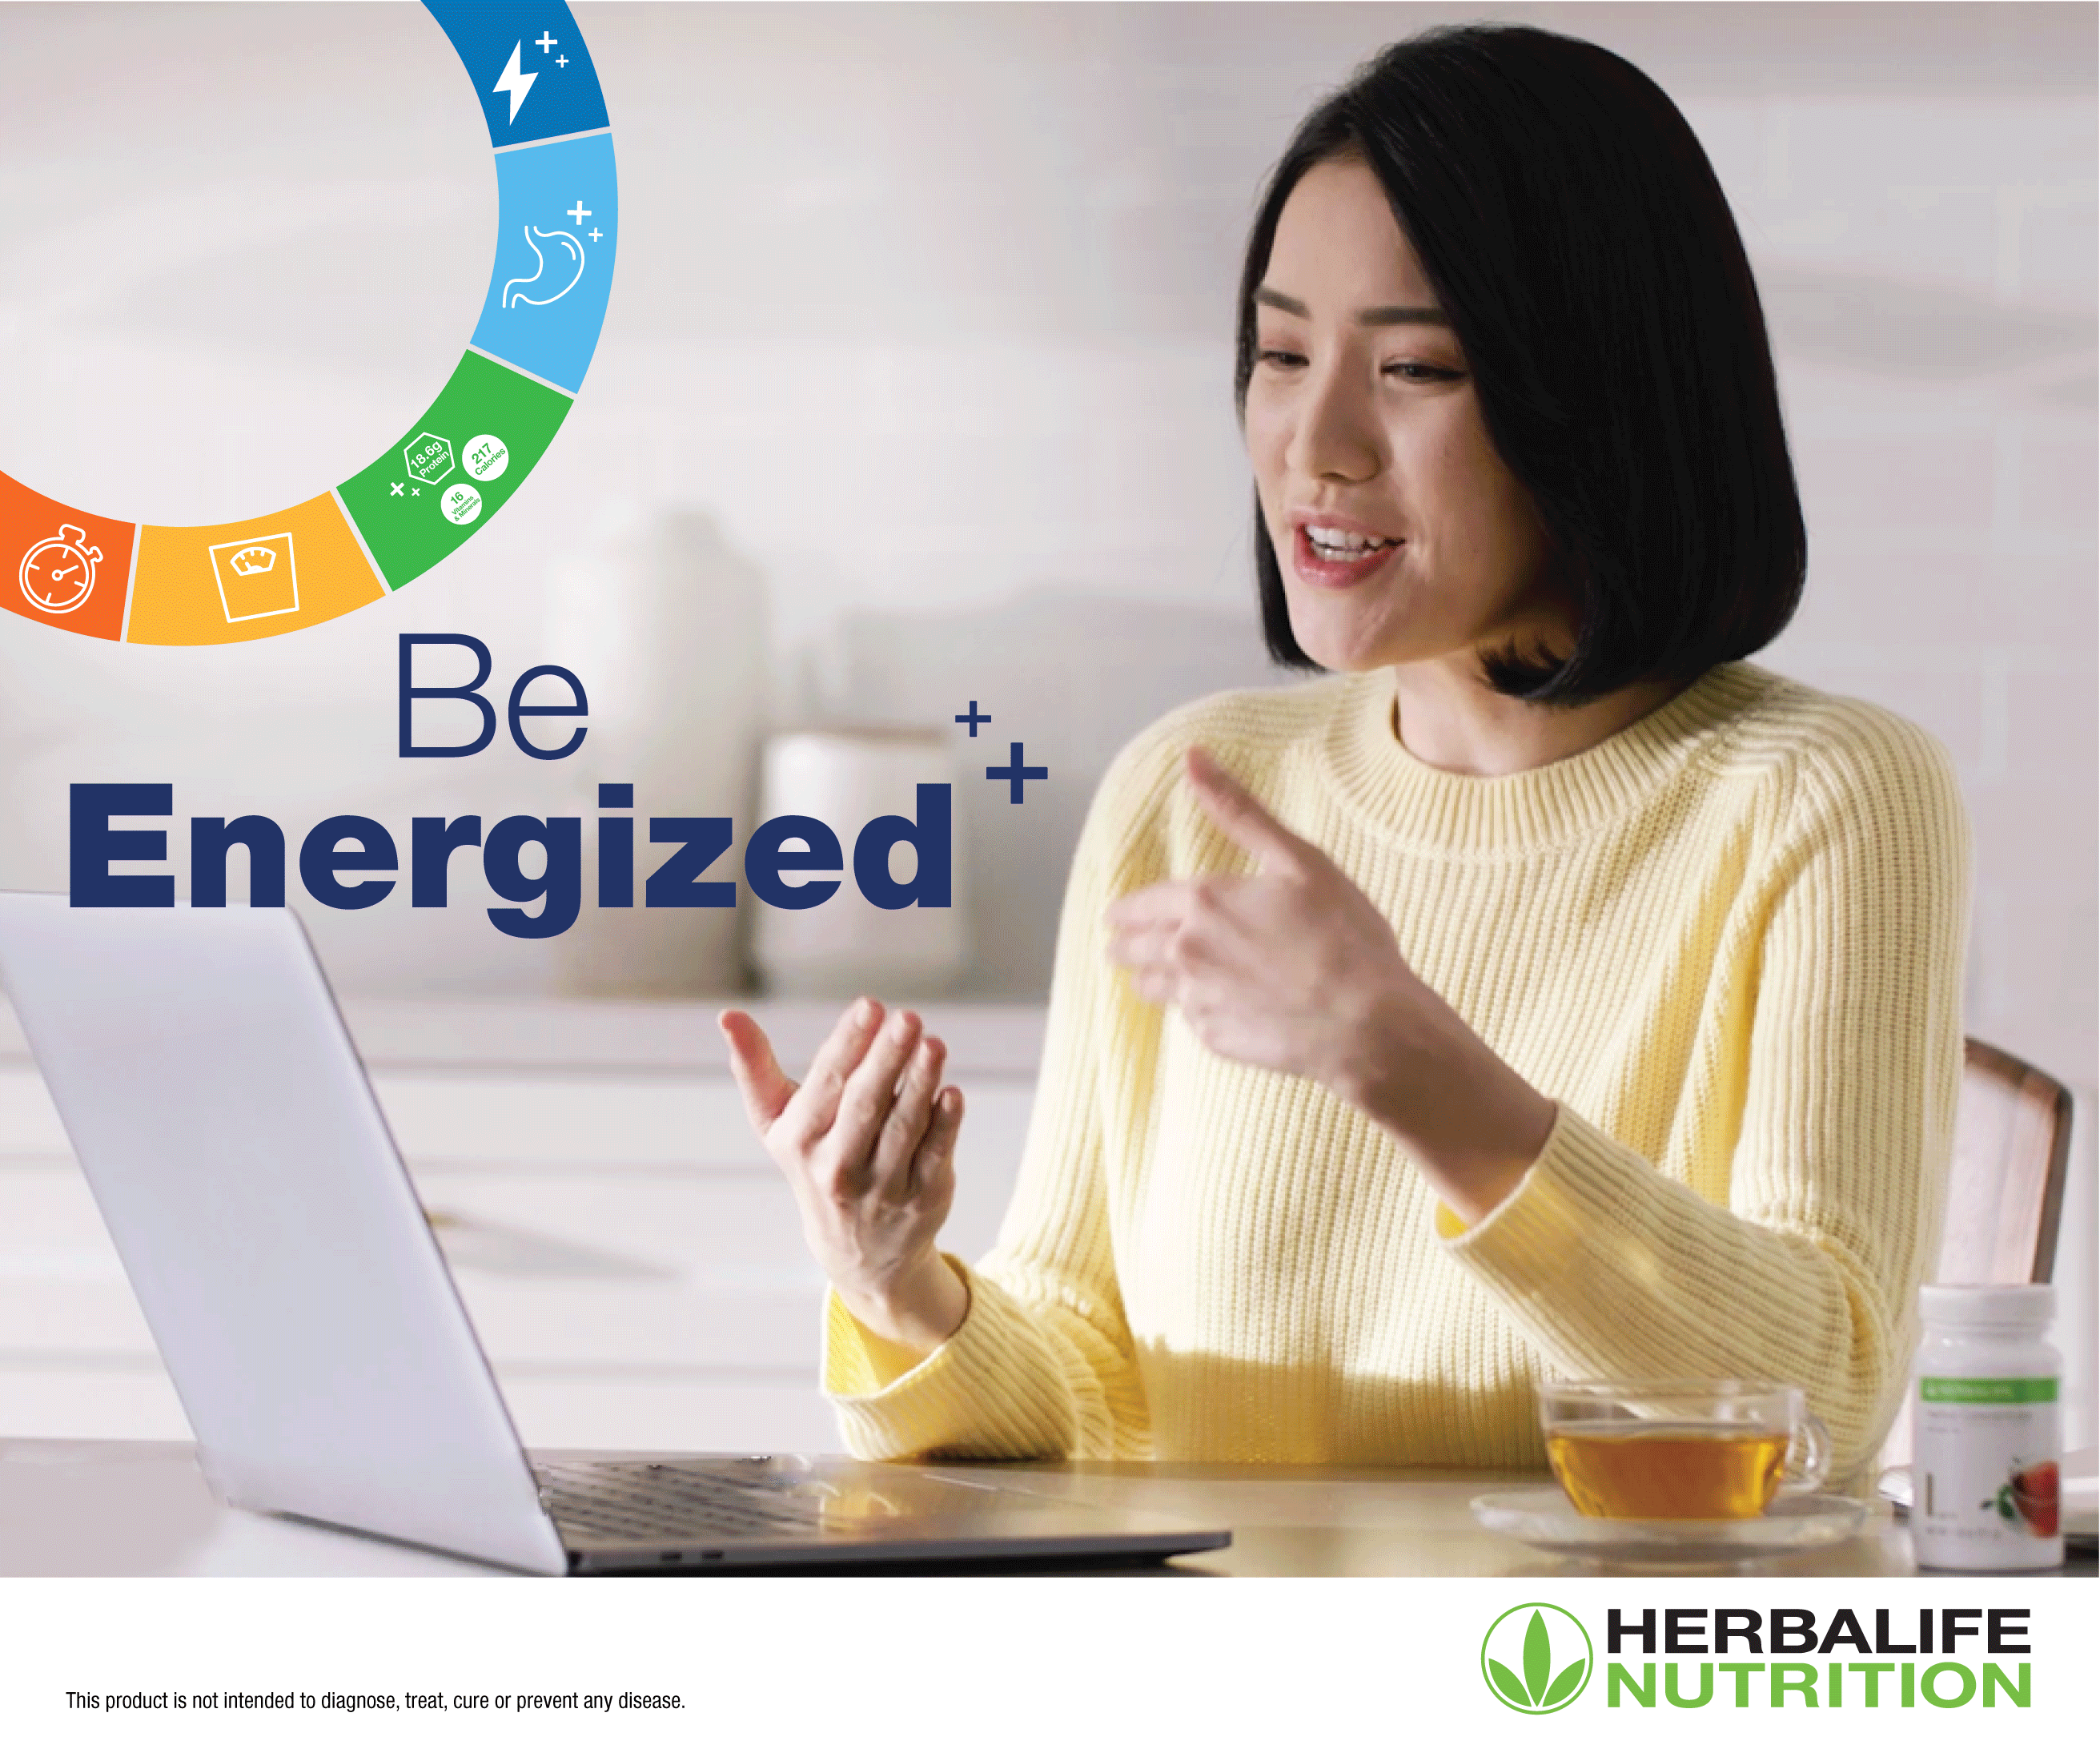 Jump-starts your day with Herbalife Nutrition Healthy Breakfast